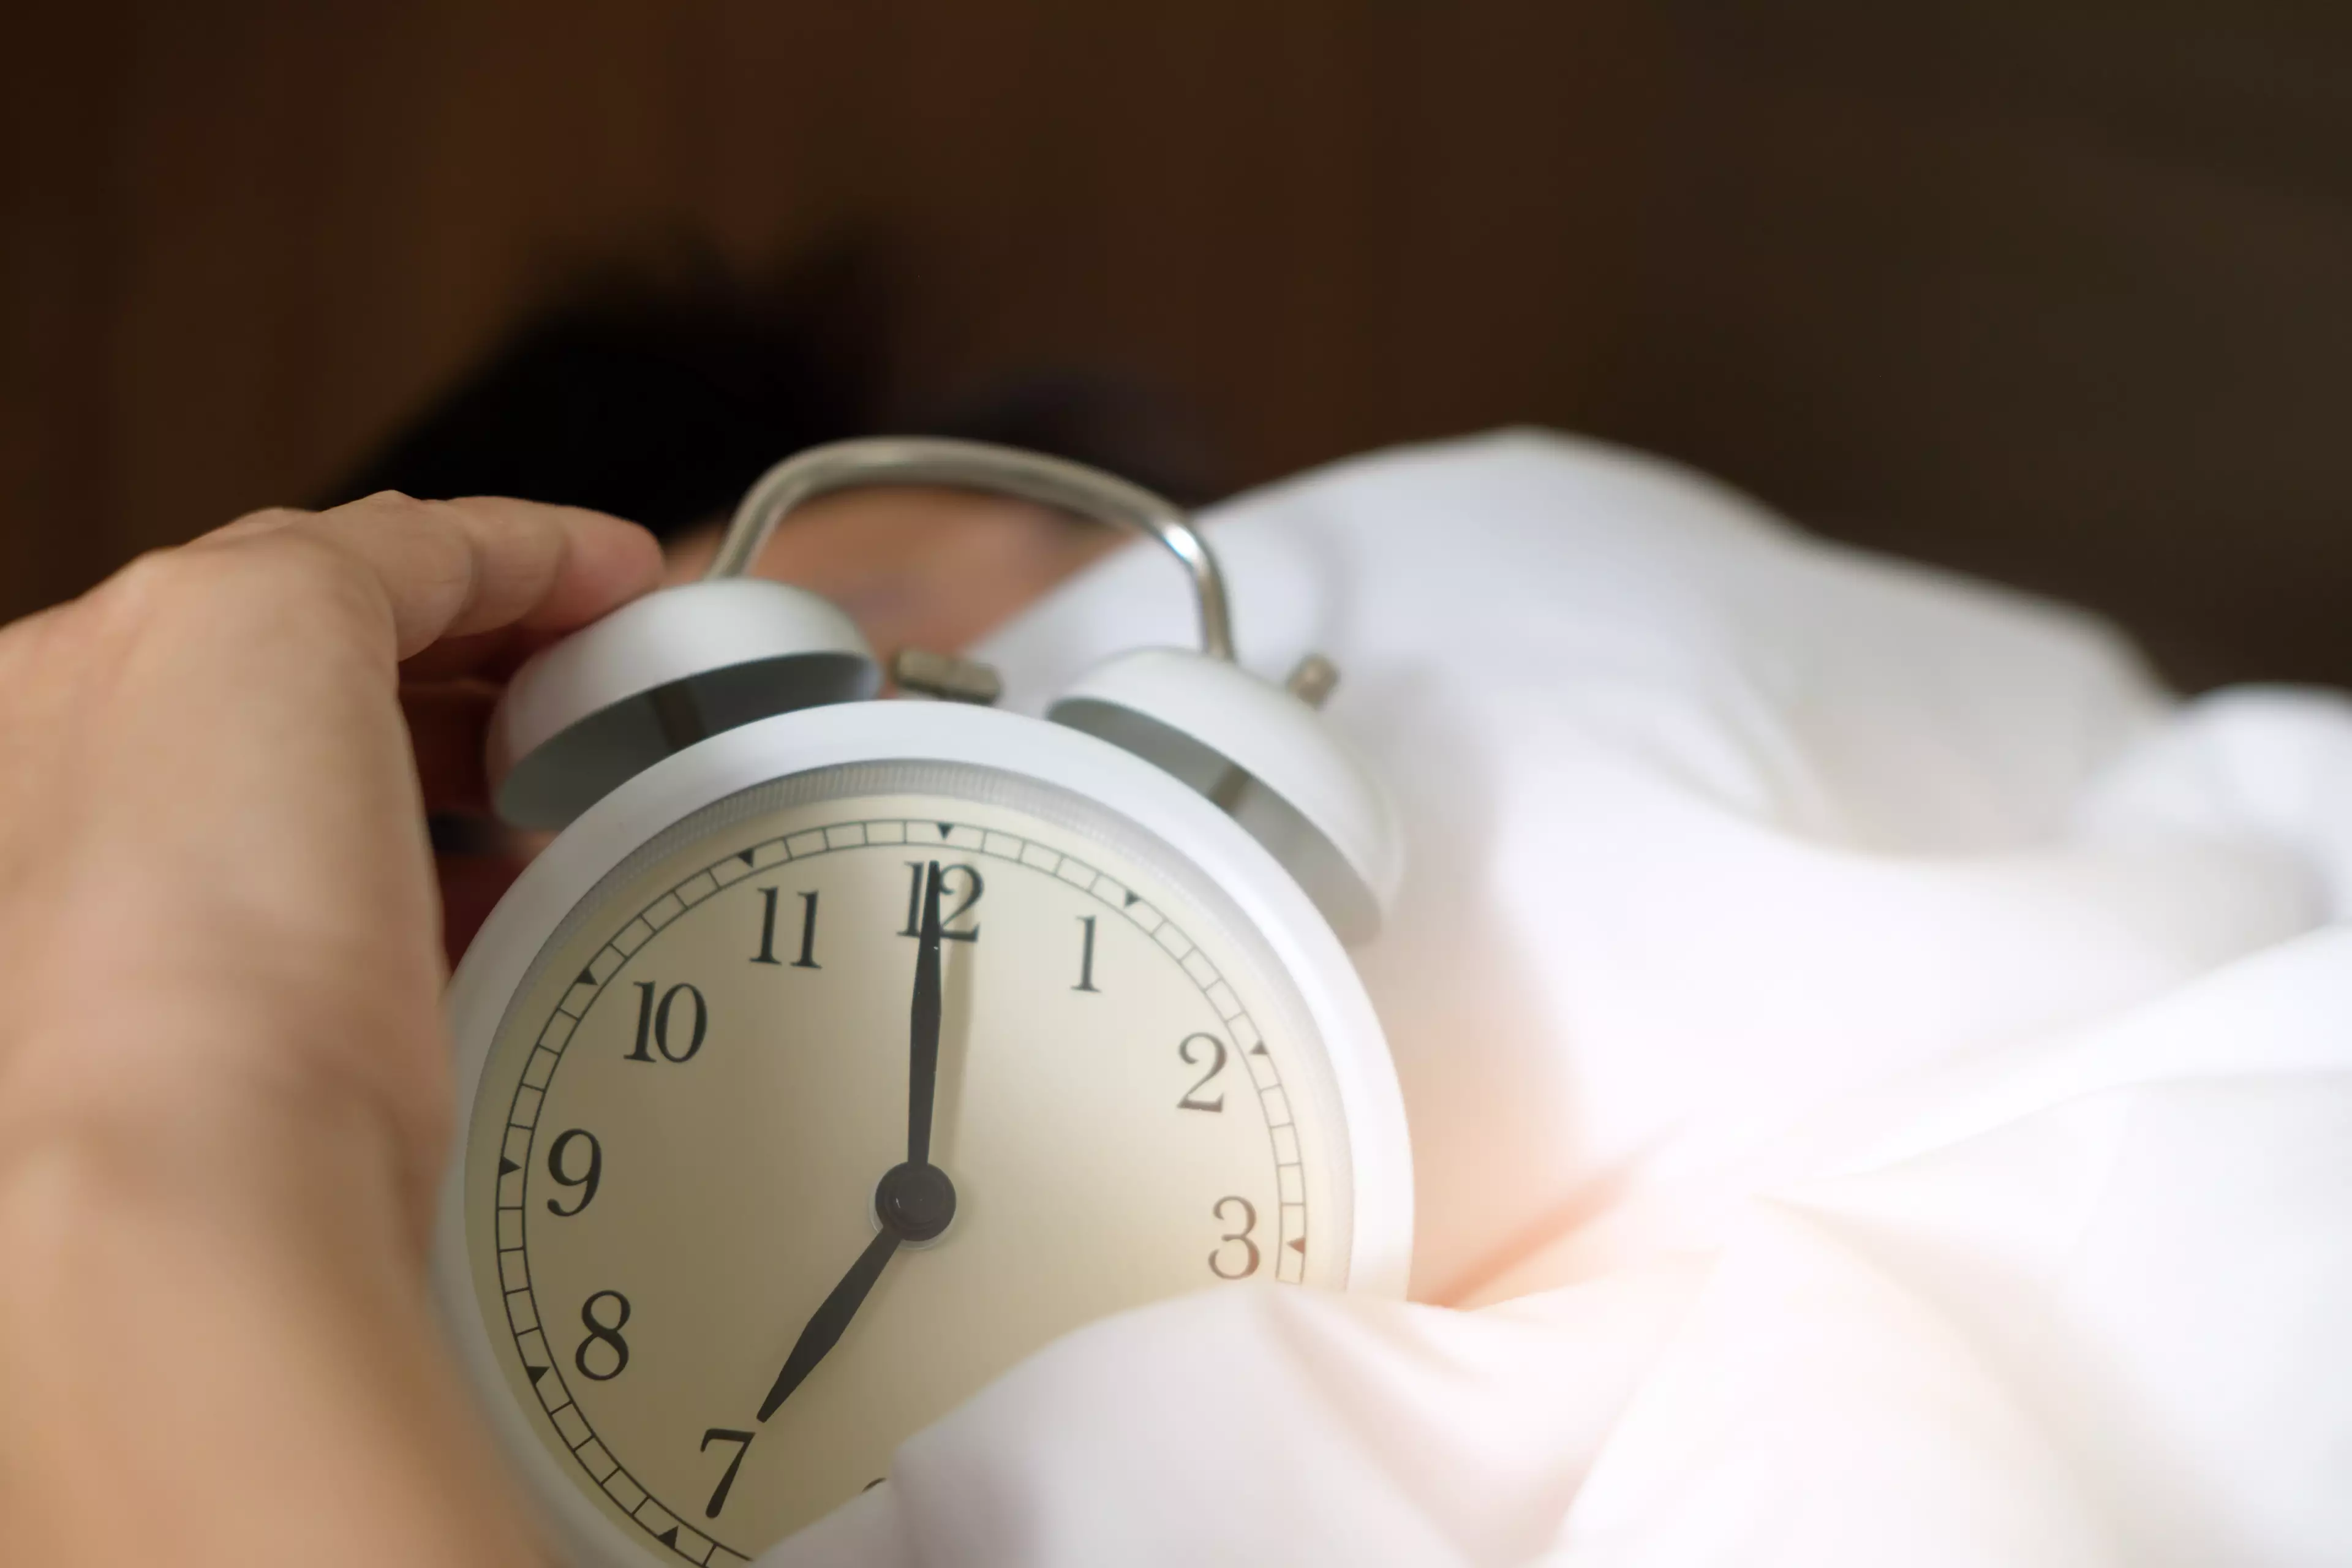 The study looked at the health benefits of sleeping in at the weekend.